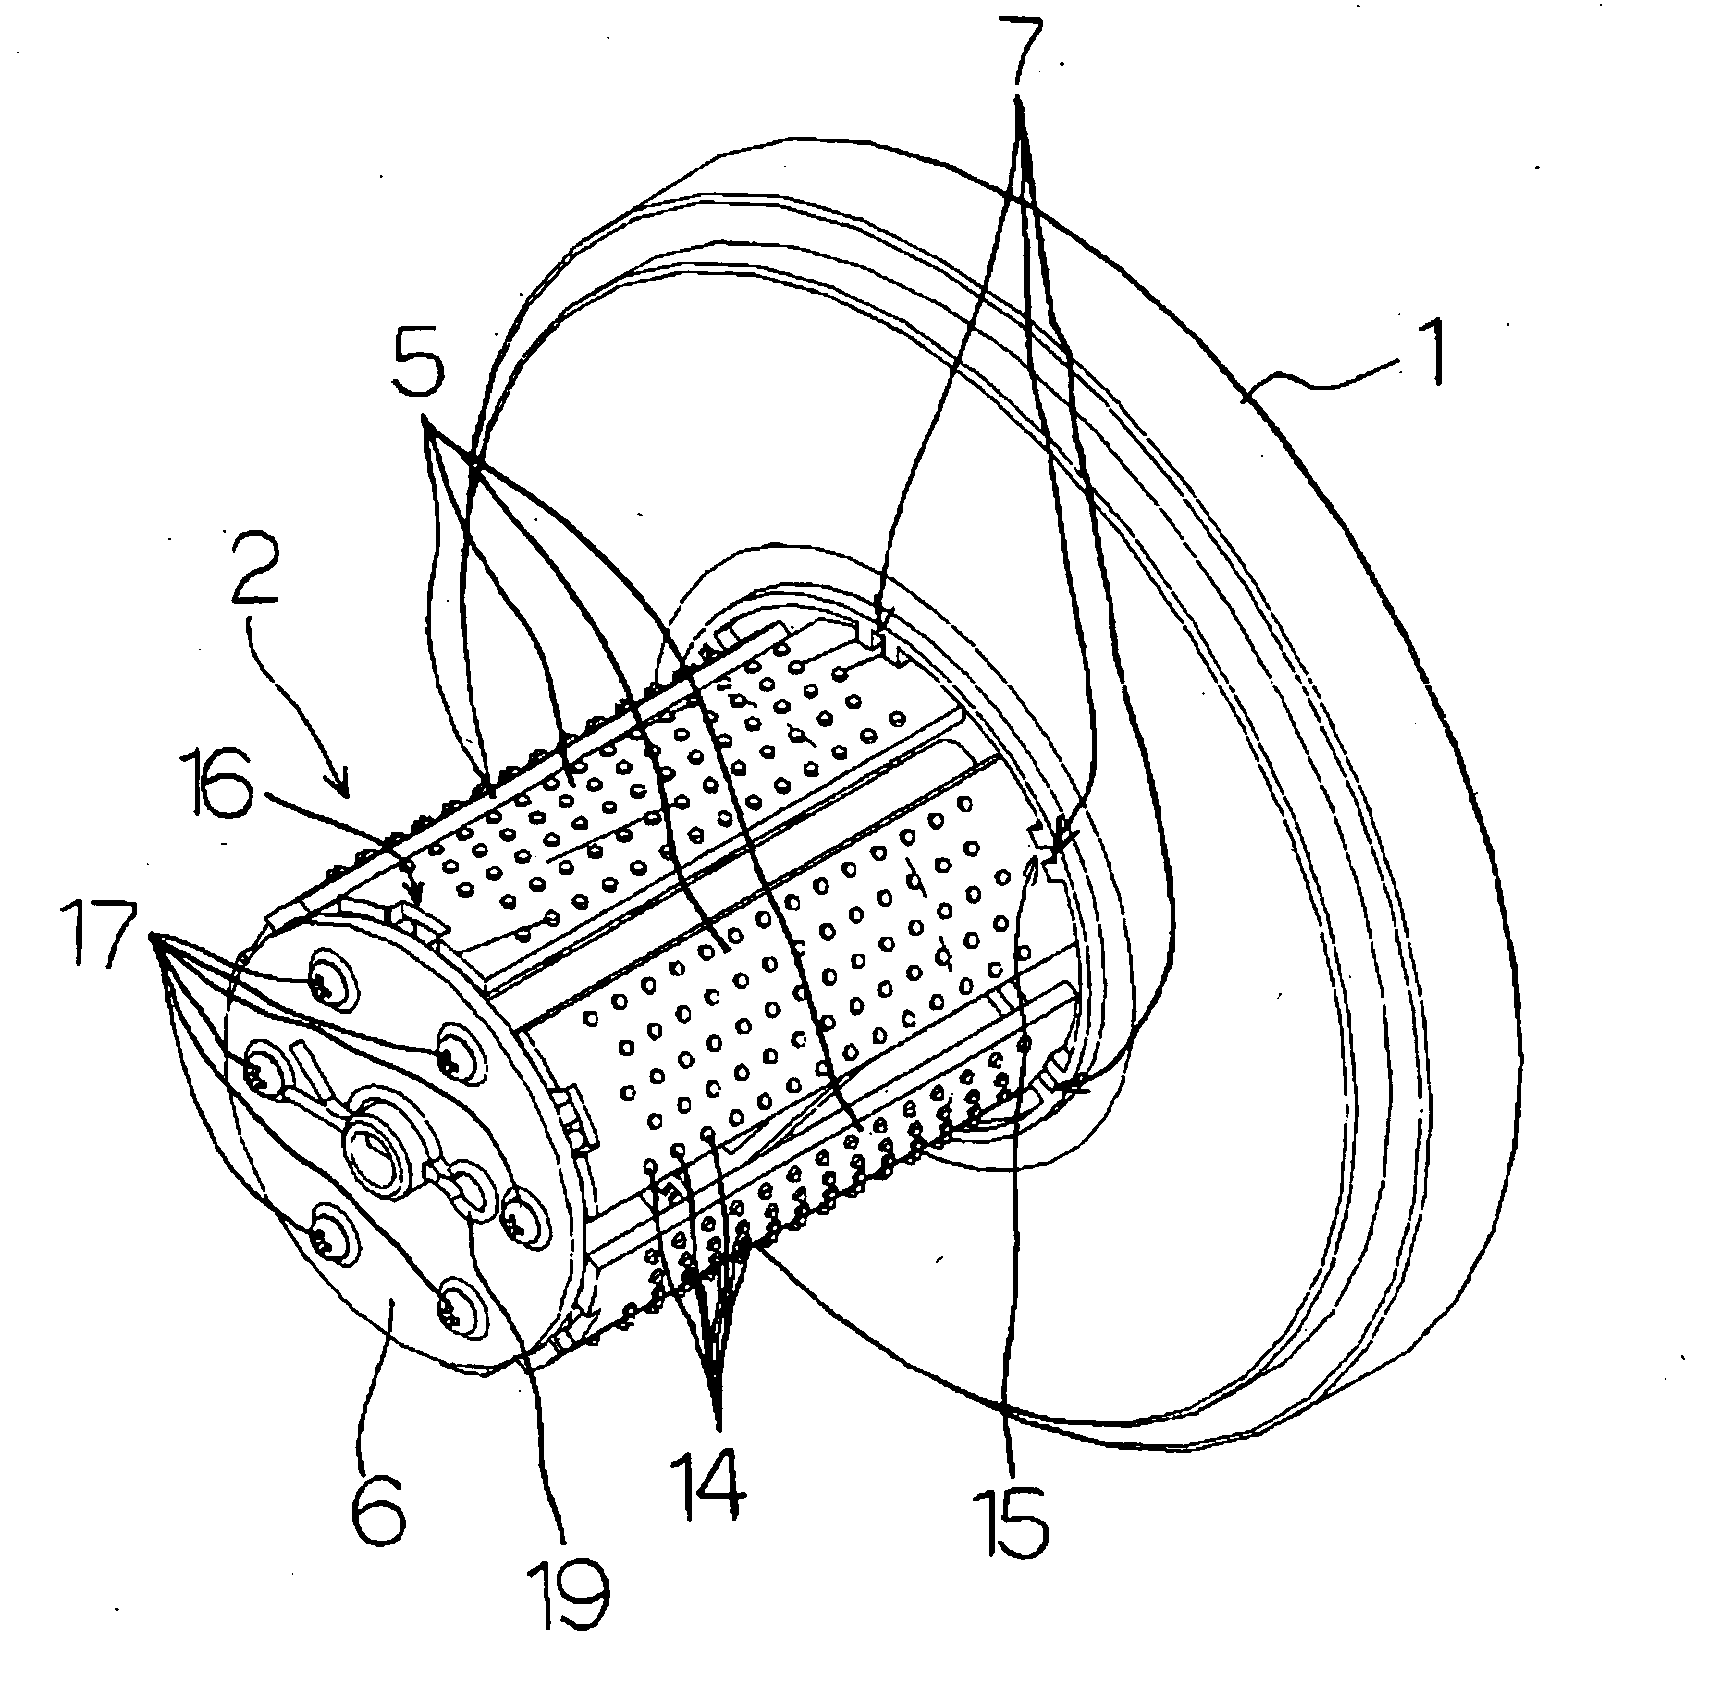 Rolled body holder and recording apparatus